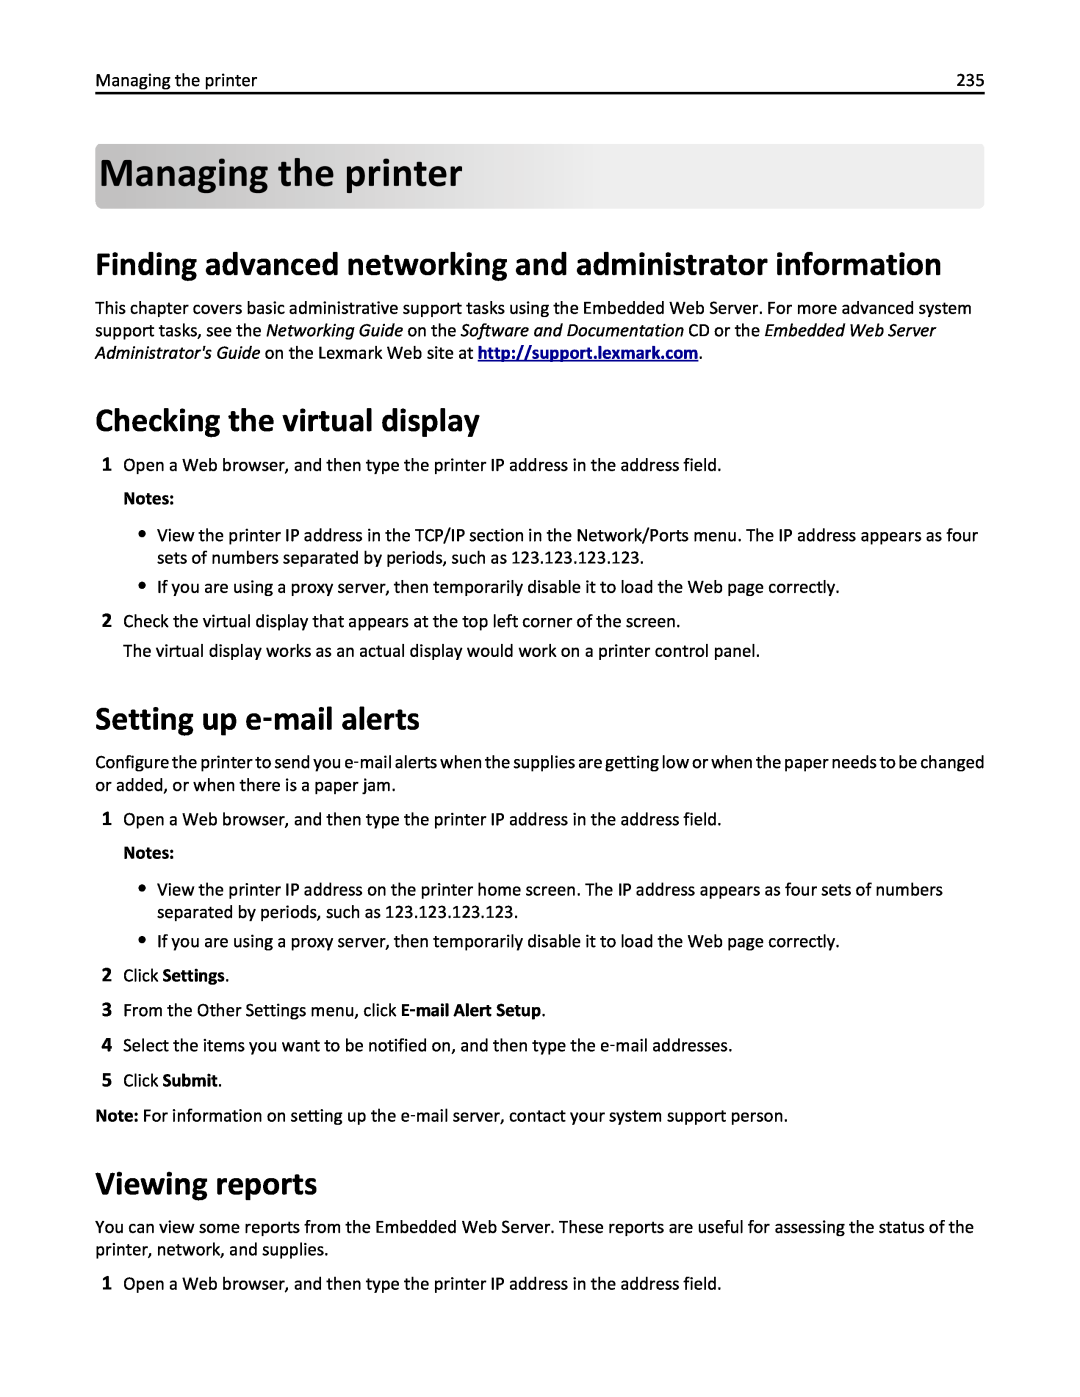 Lexmark 436 Managing the printer, Finding advanced networking and administrator information, Checking the virtual display 